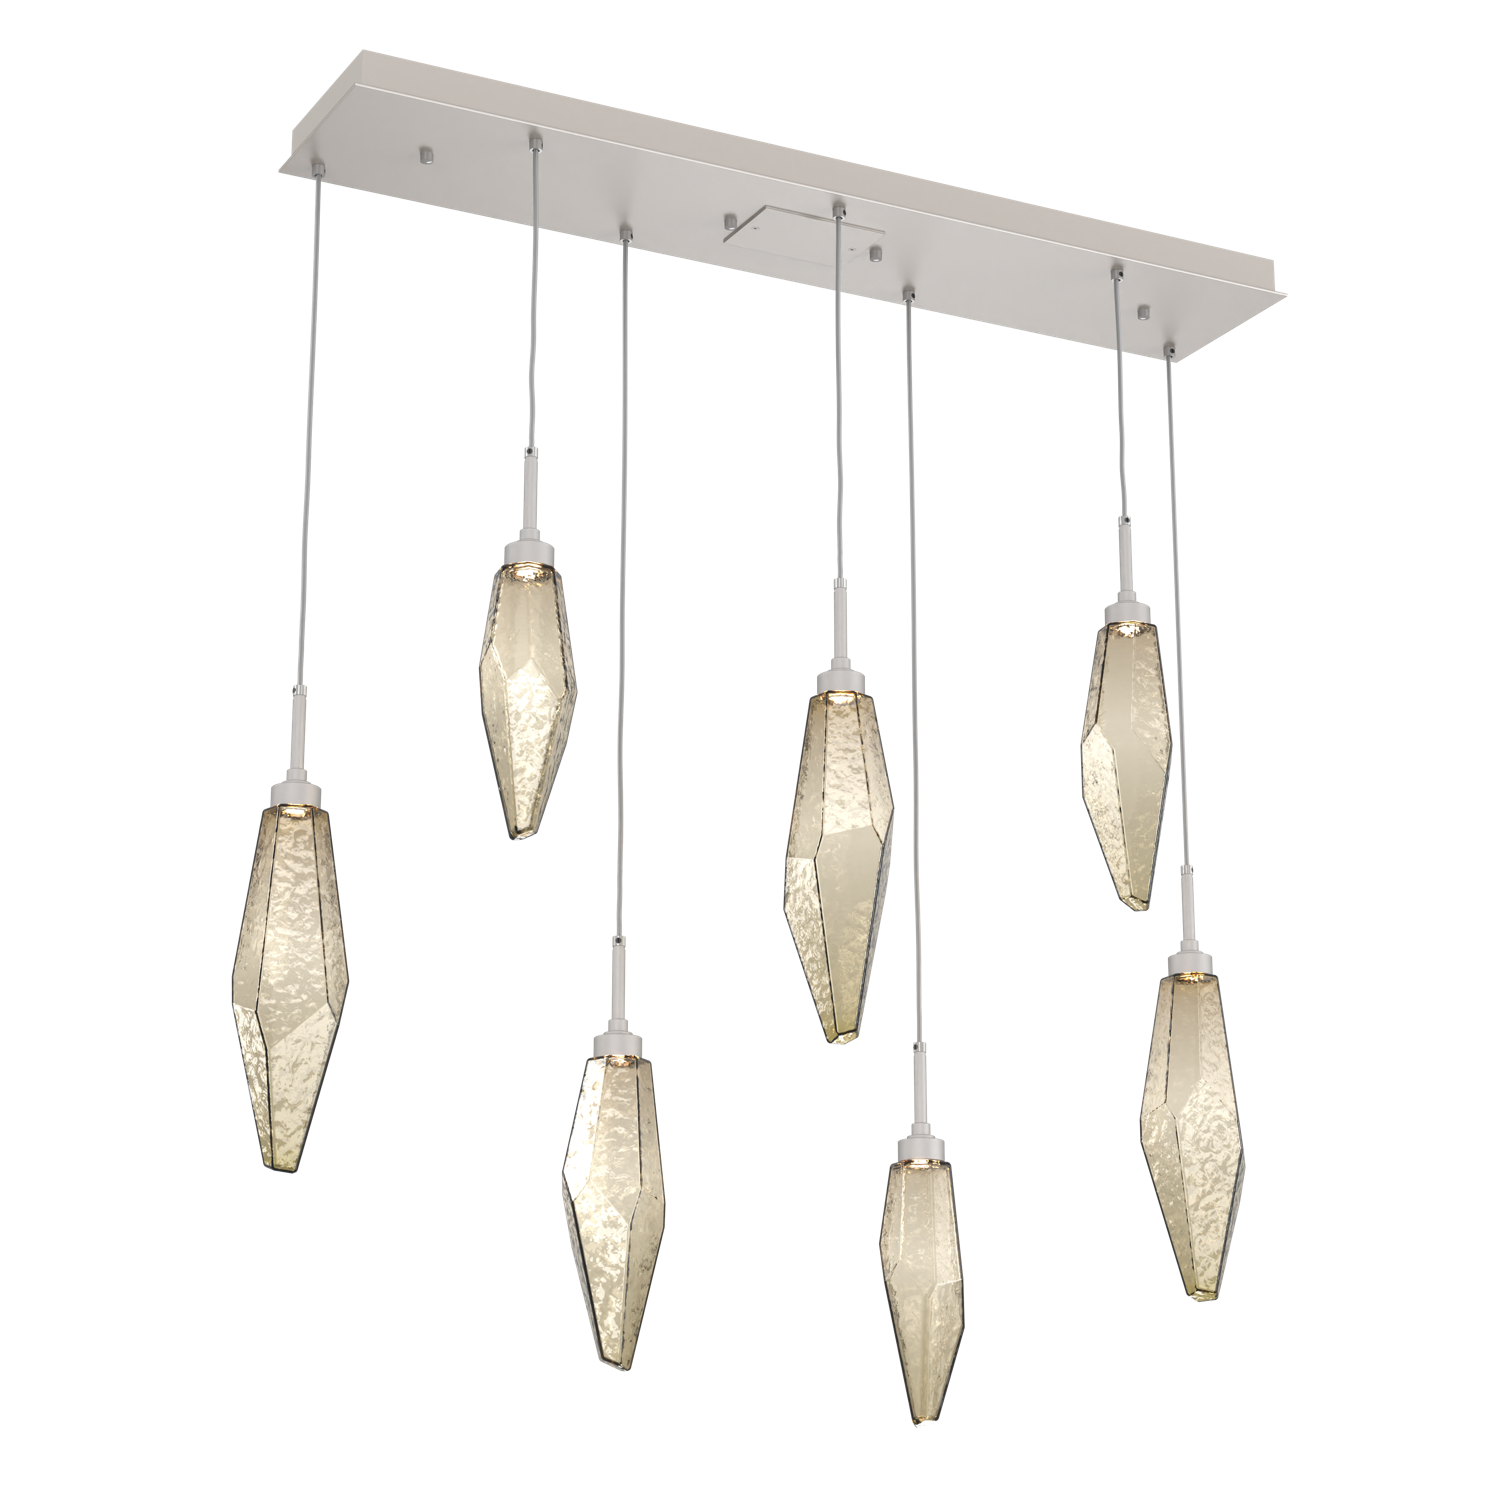 PLB0050-07-BS-CB-Hammerton-Studio-Rock-Crystal-7-light-linear-pendant-chandelier-with-beige-silver-finish-and-chilled-bronze-blown-glass-shades-and-LED-lamping